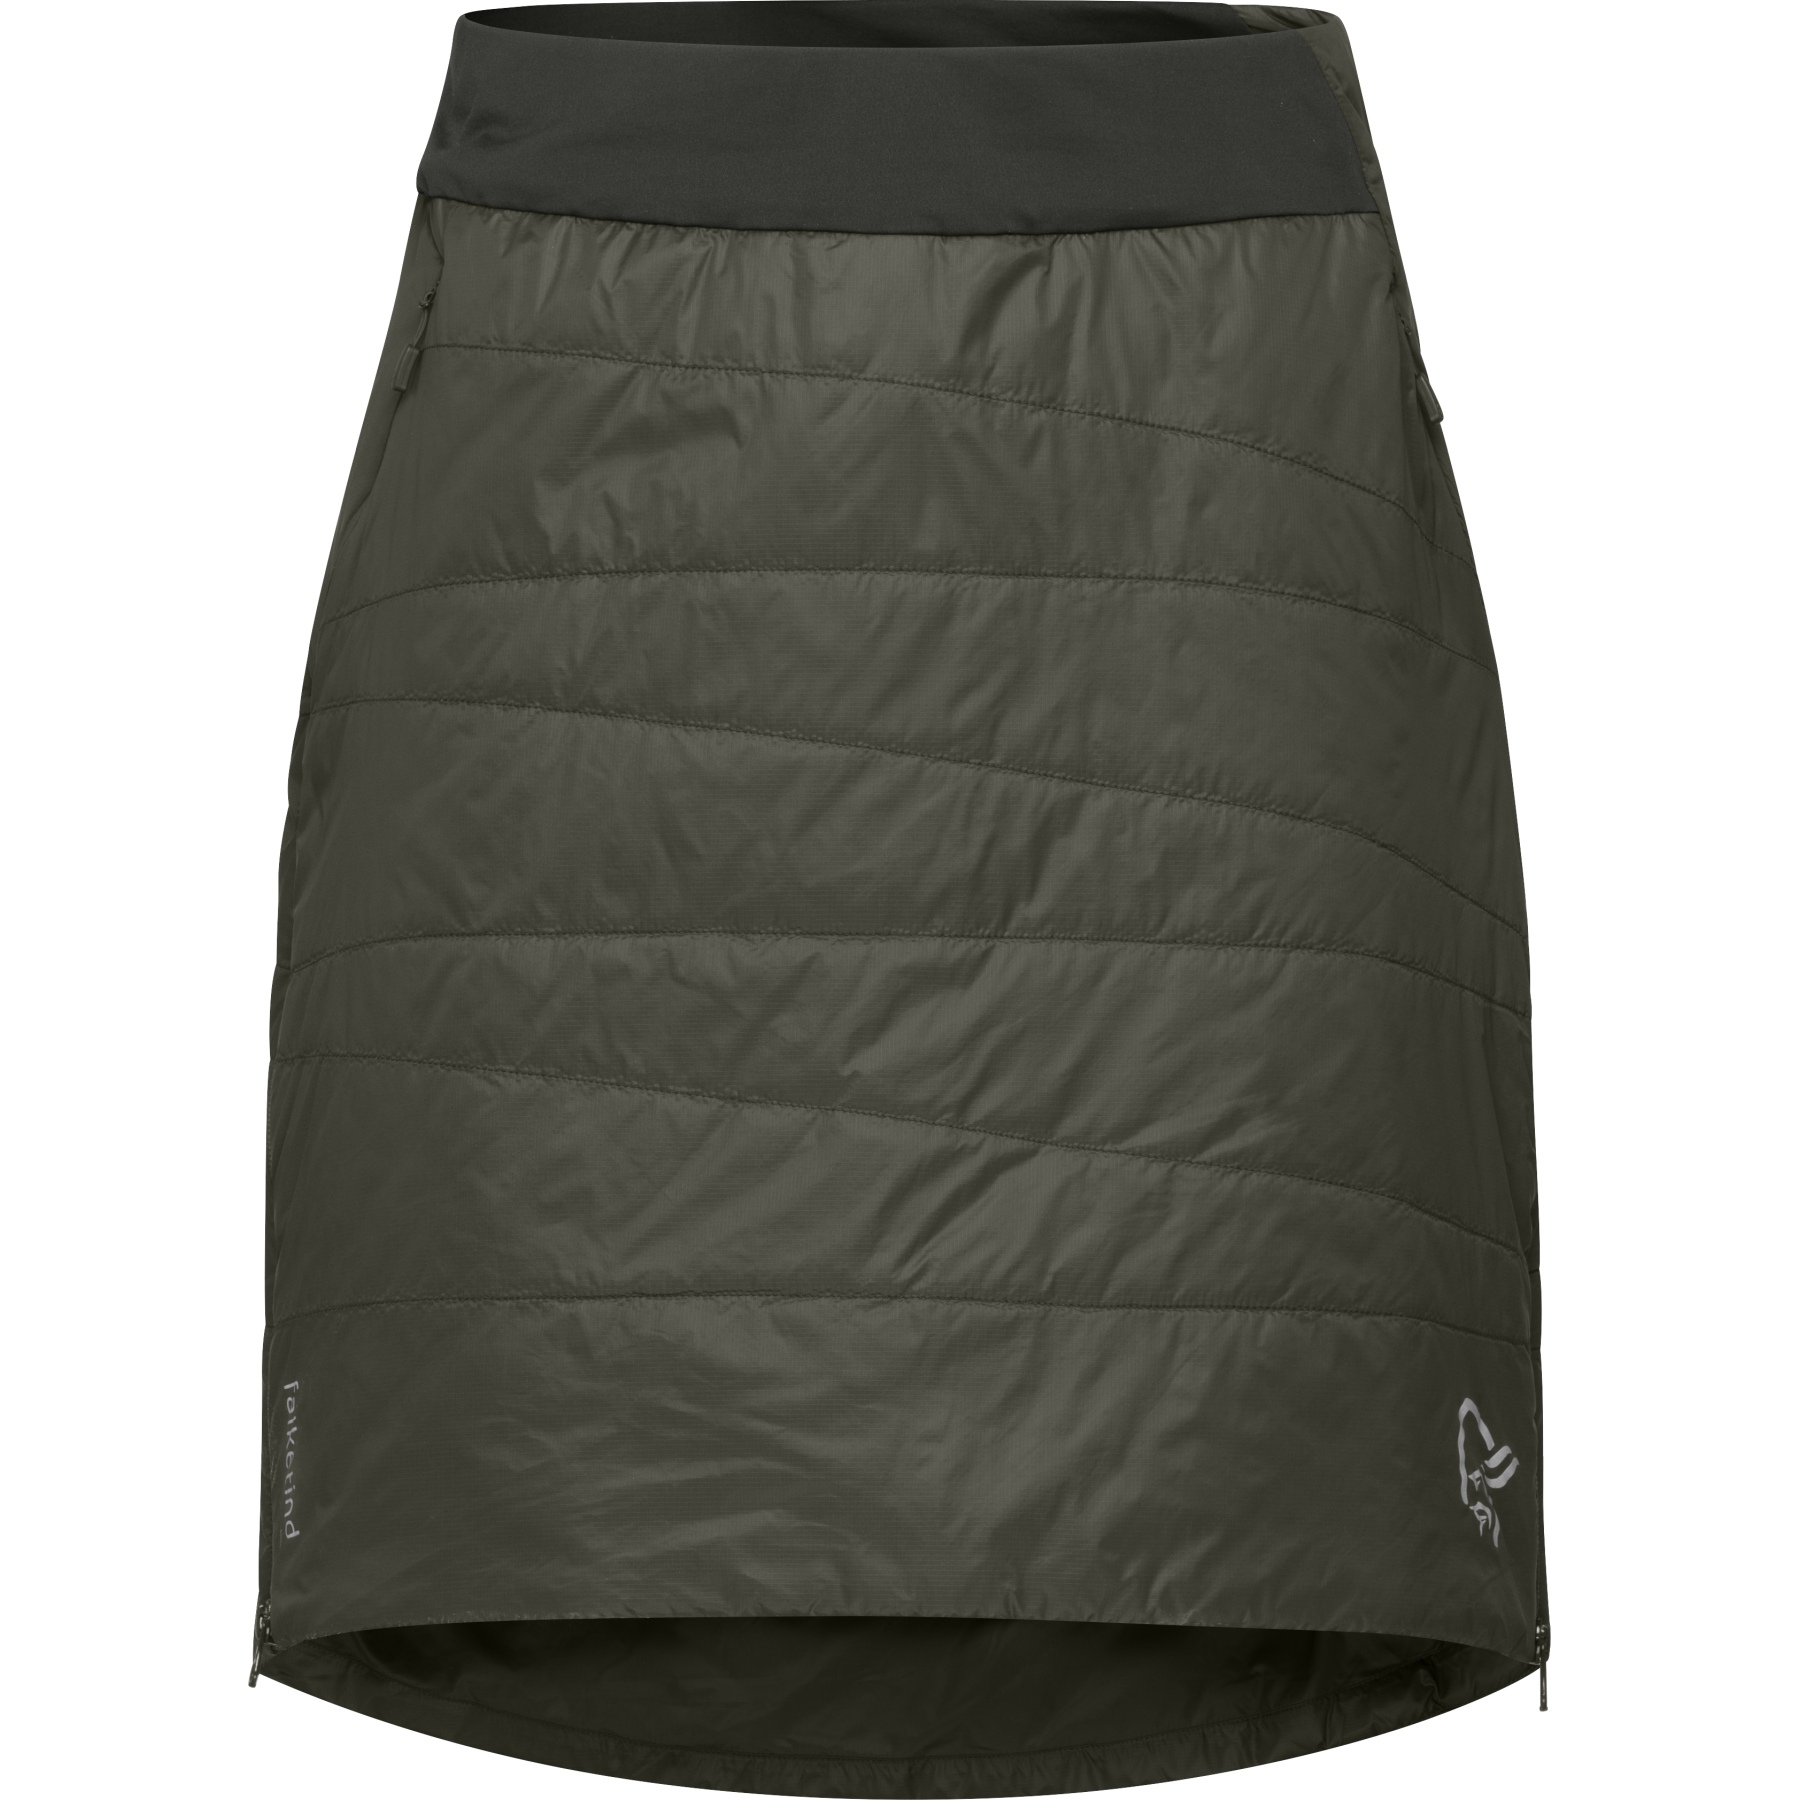 Picture of Norrona falketind thermo80 Skirt Women - Olive Night